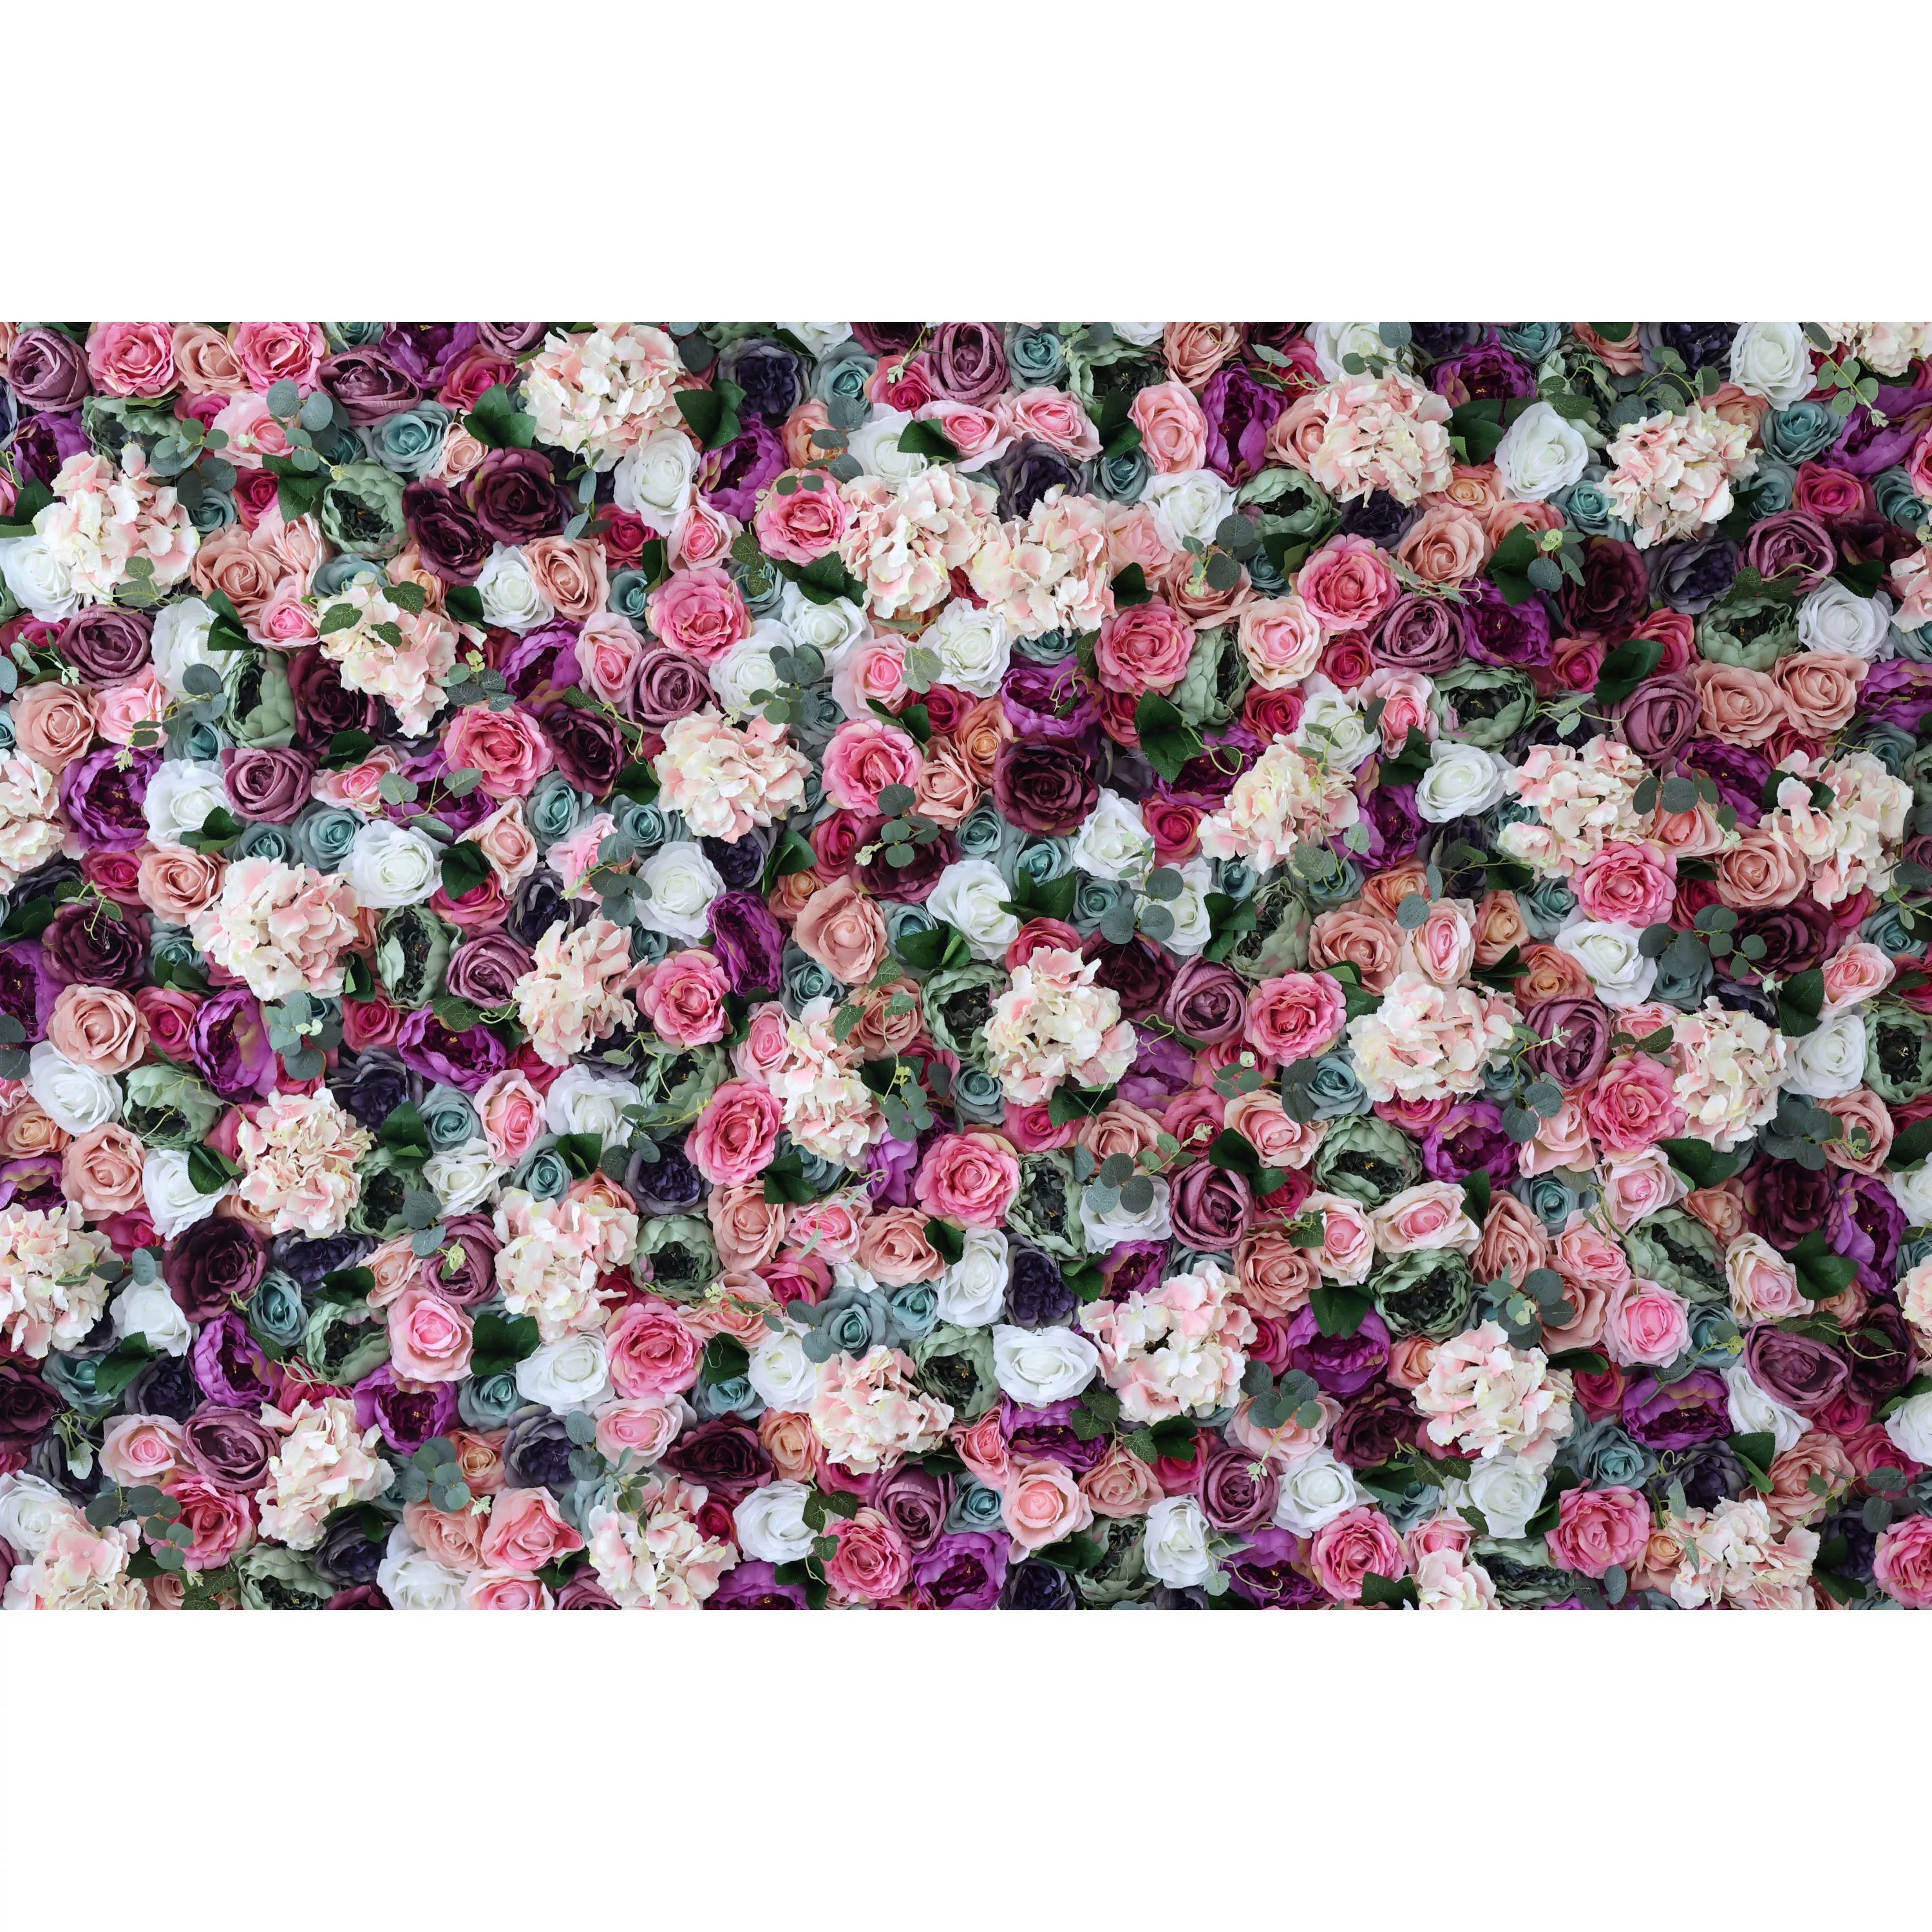 Valar Flowers artificial mixed floral fabric backdrop with eggplant purple and white colors for weddings and events - VF-0803